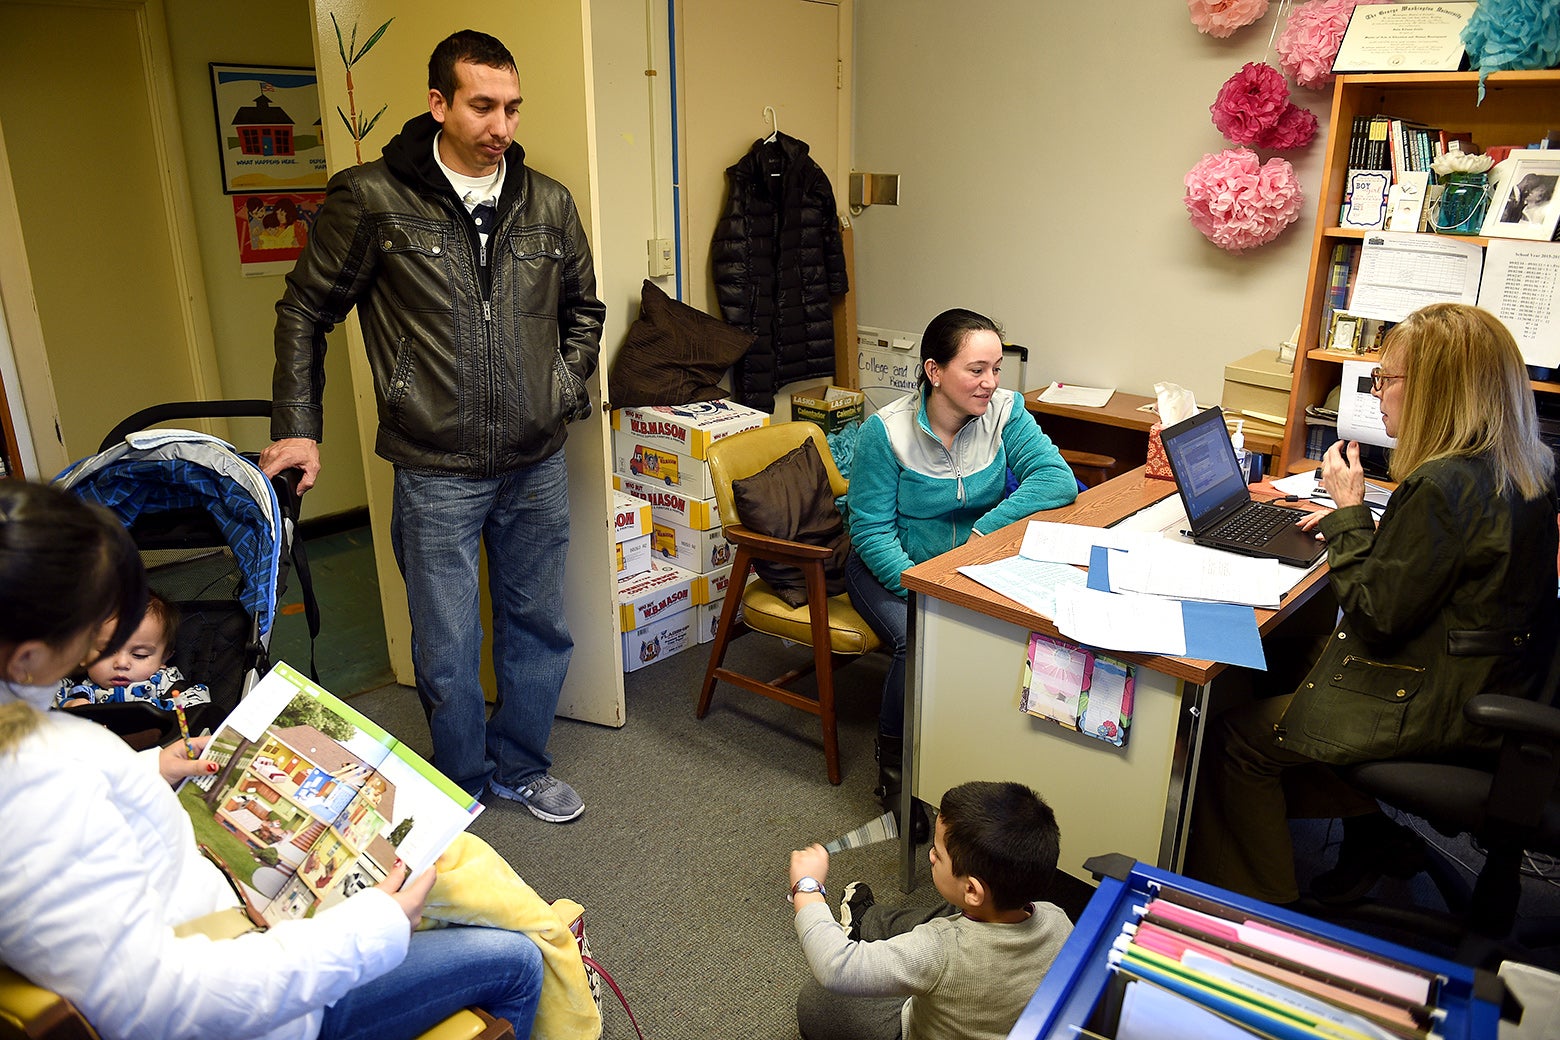 Maura Salguero, sitting, center, processes her daughter Jennifer Garcia Salguero, 12, left, at the International Student Counseling Office at the Judy Hoyer Learning Center of Cool Spring Elementary School in Adelphi, MD on Jan. 13, 2016.